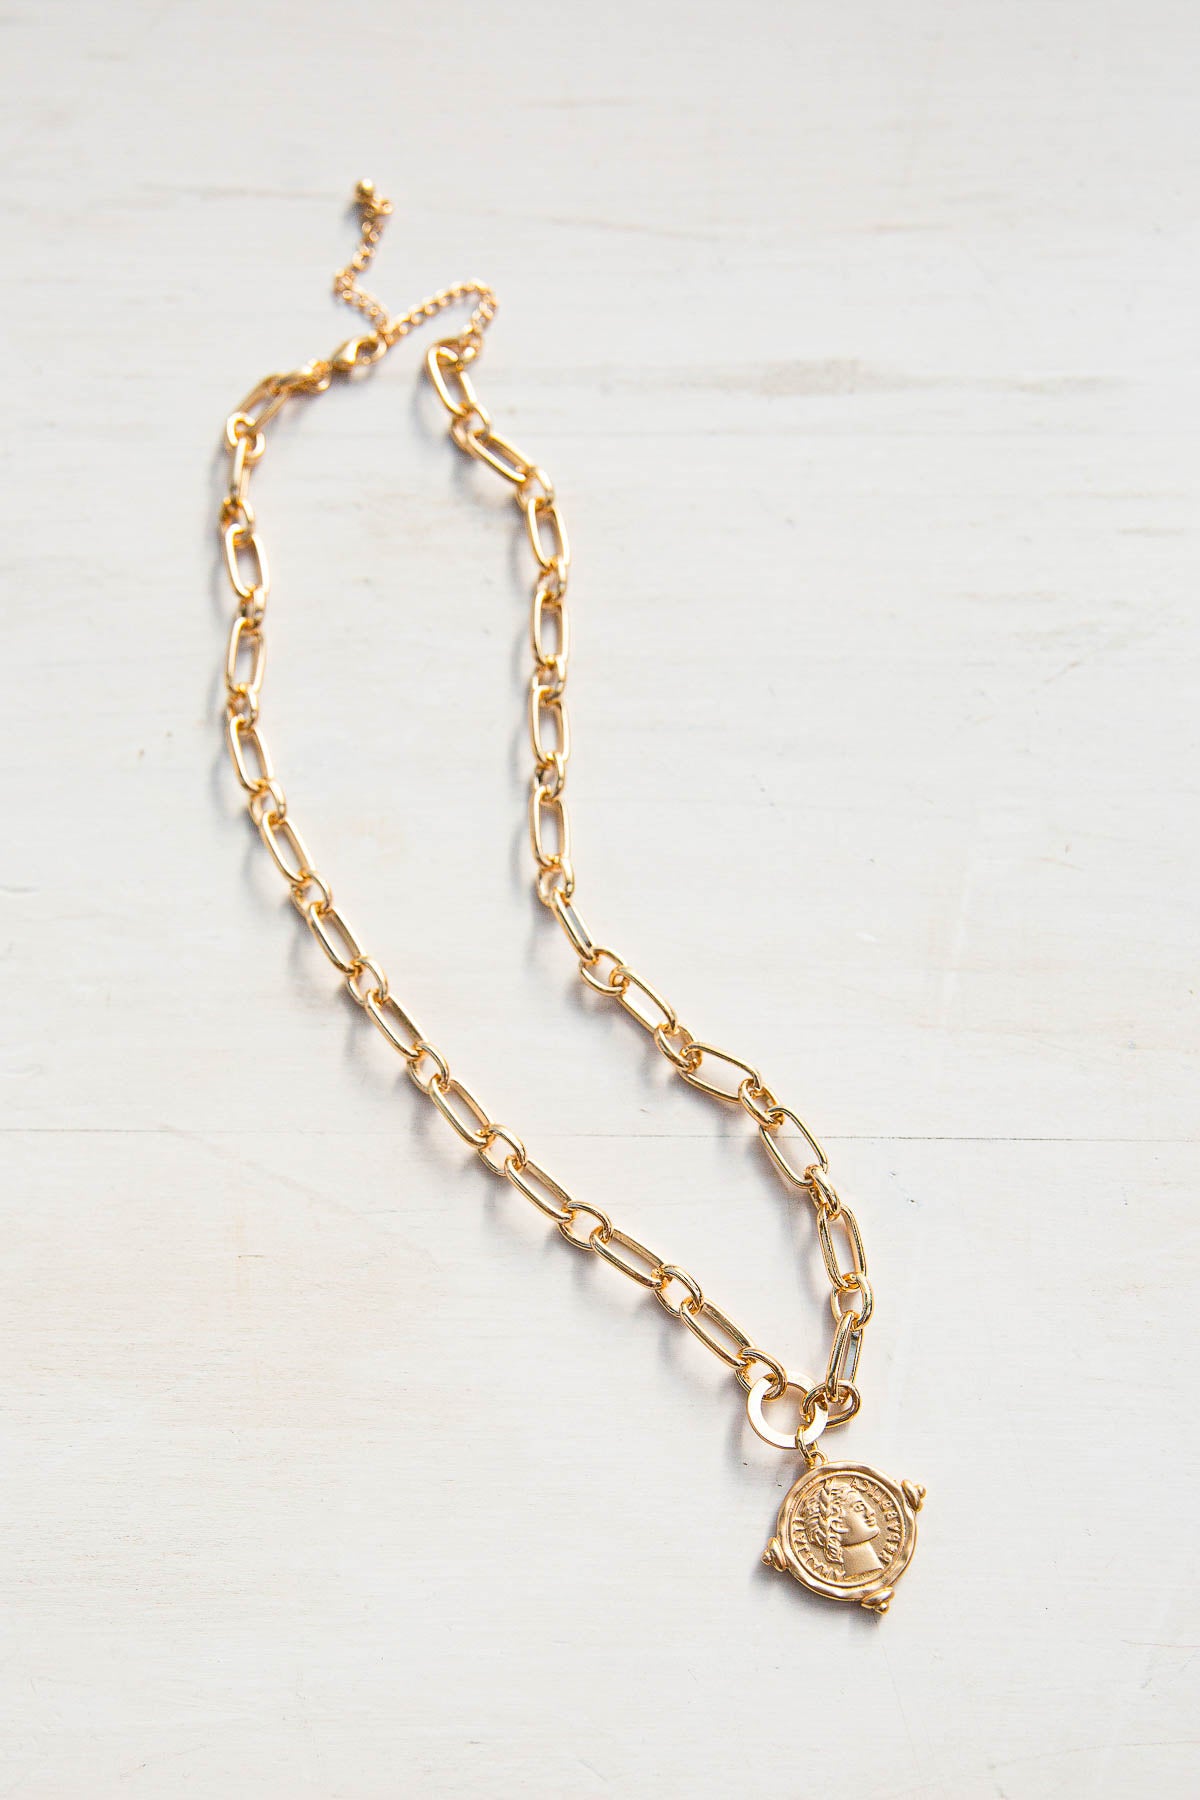 Antique Coin Necklace In Gold